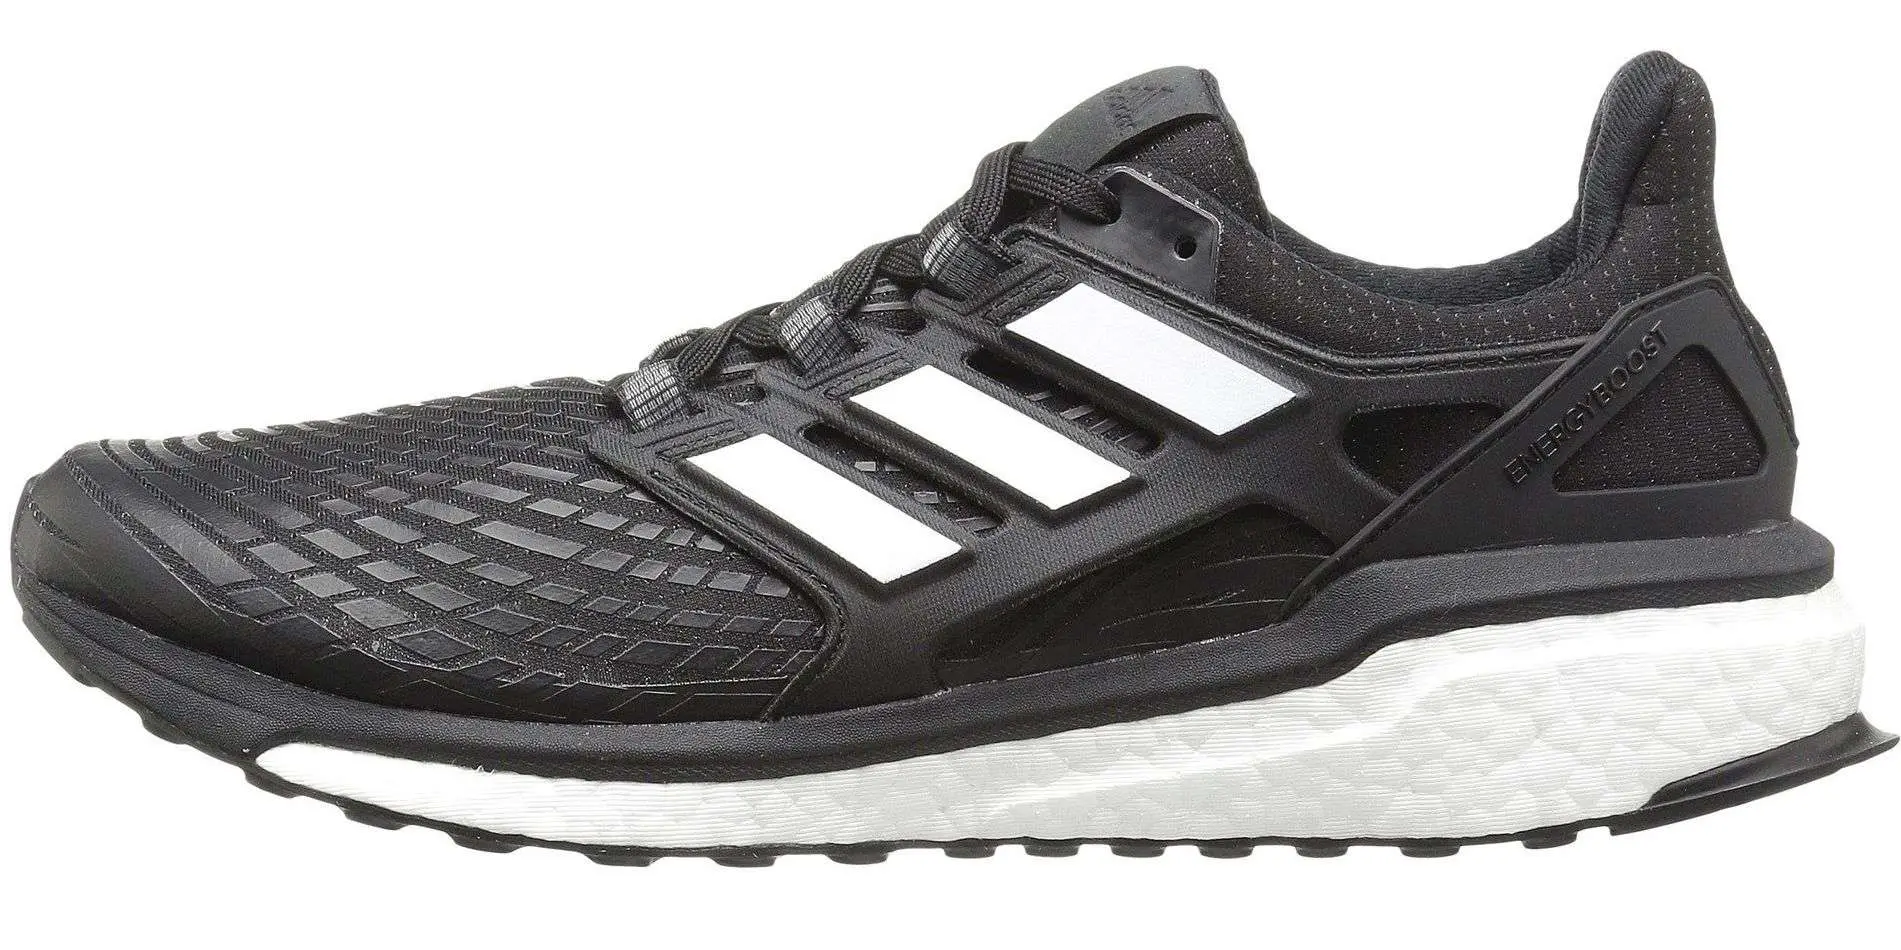 The 10 Best Adidas Running Shoes